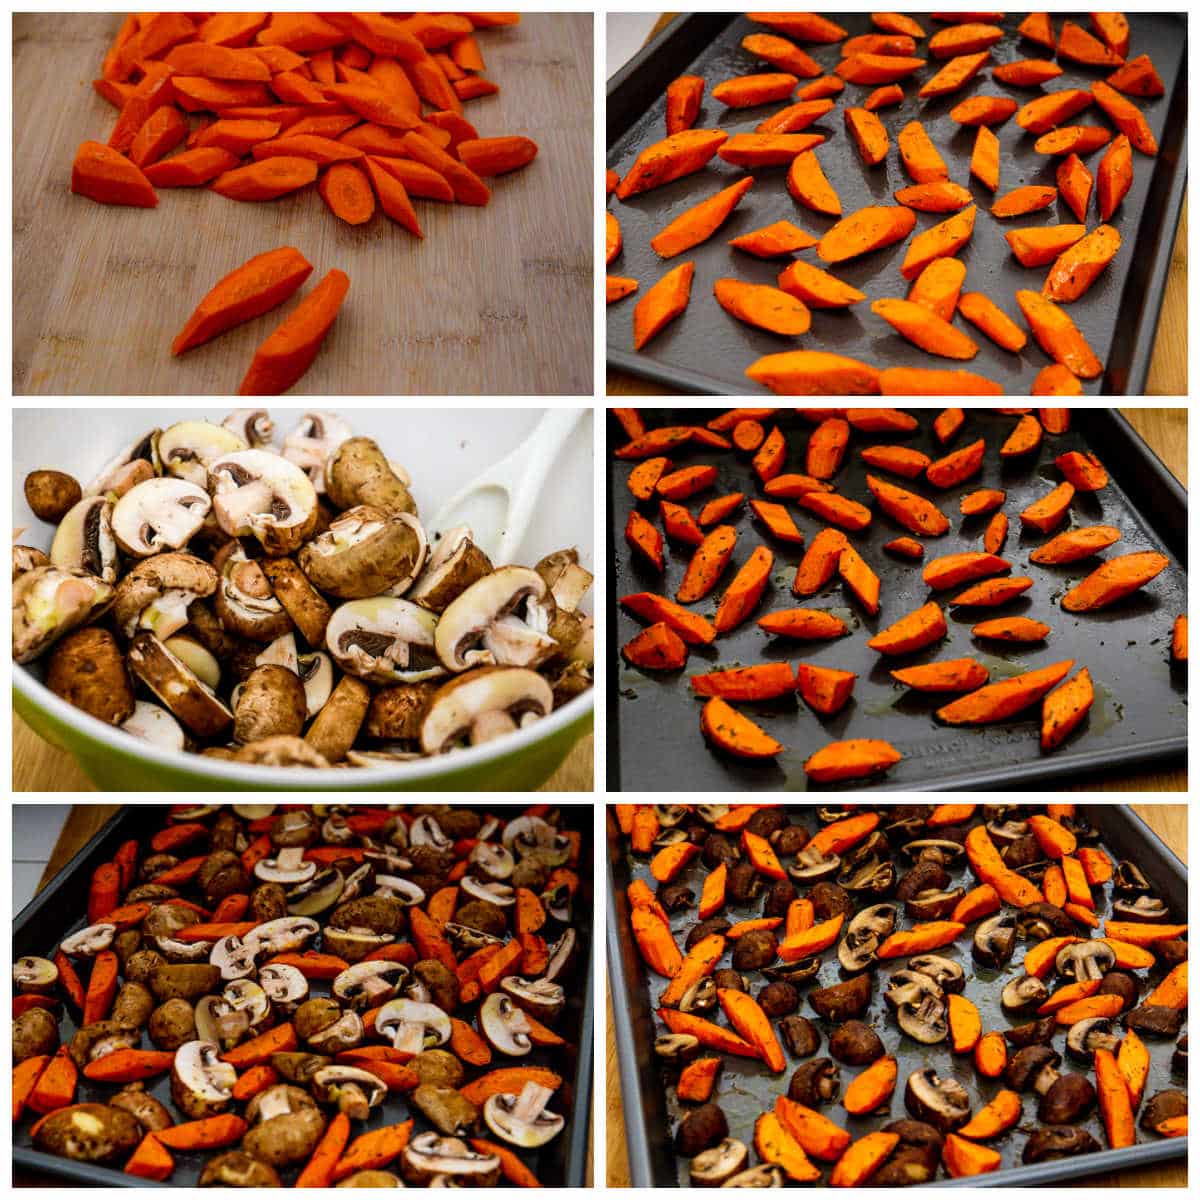 Photo collage showing the steps of the Roasted Carrot and Mushroom recipe